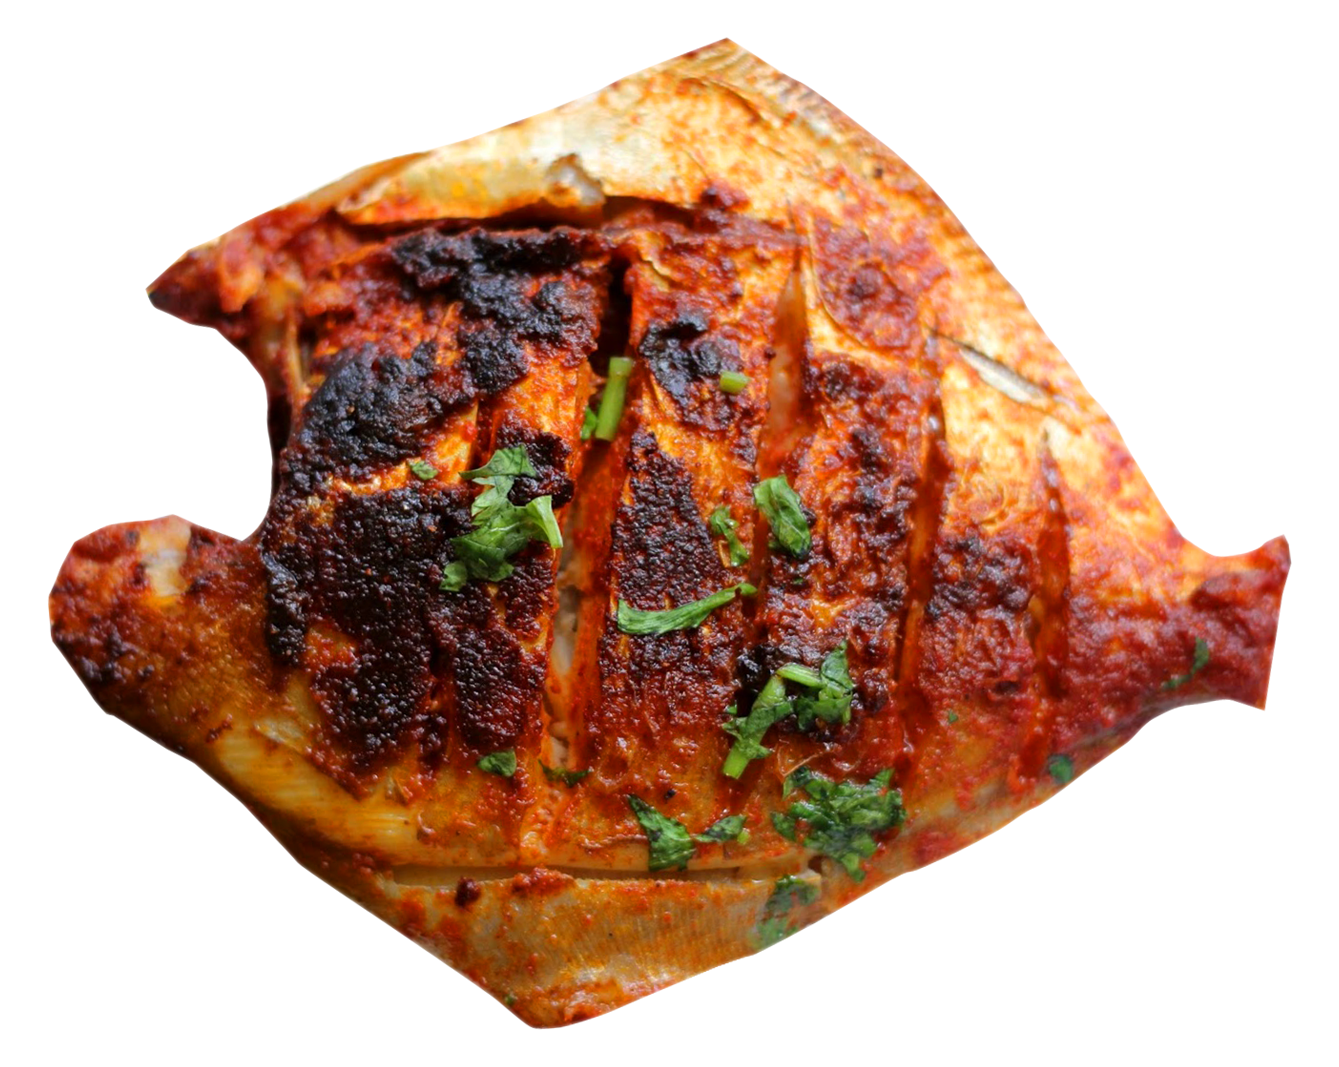 Fried Fish Png Transparent Image - Fish Fry, Transparent background PNG HD thumbnail